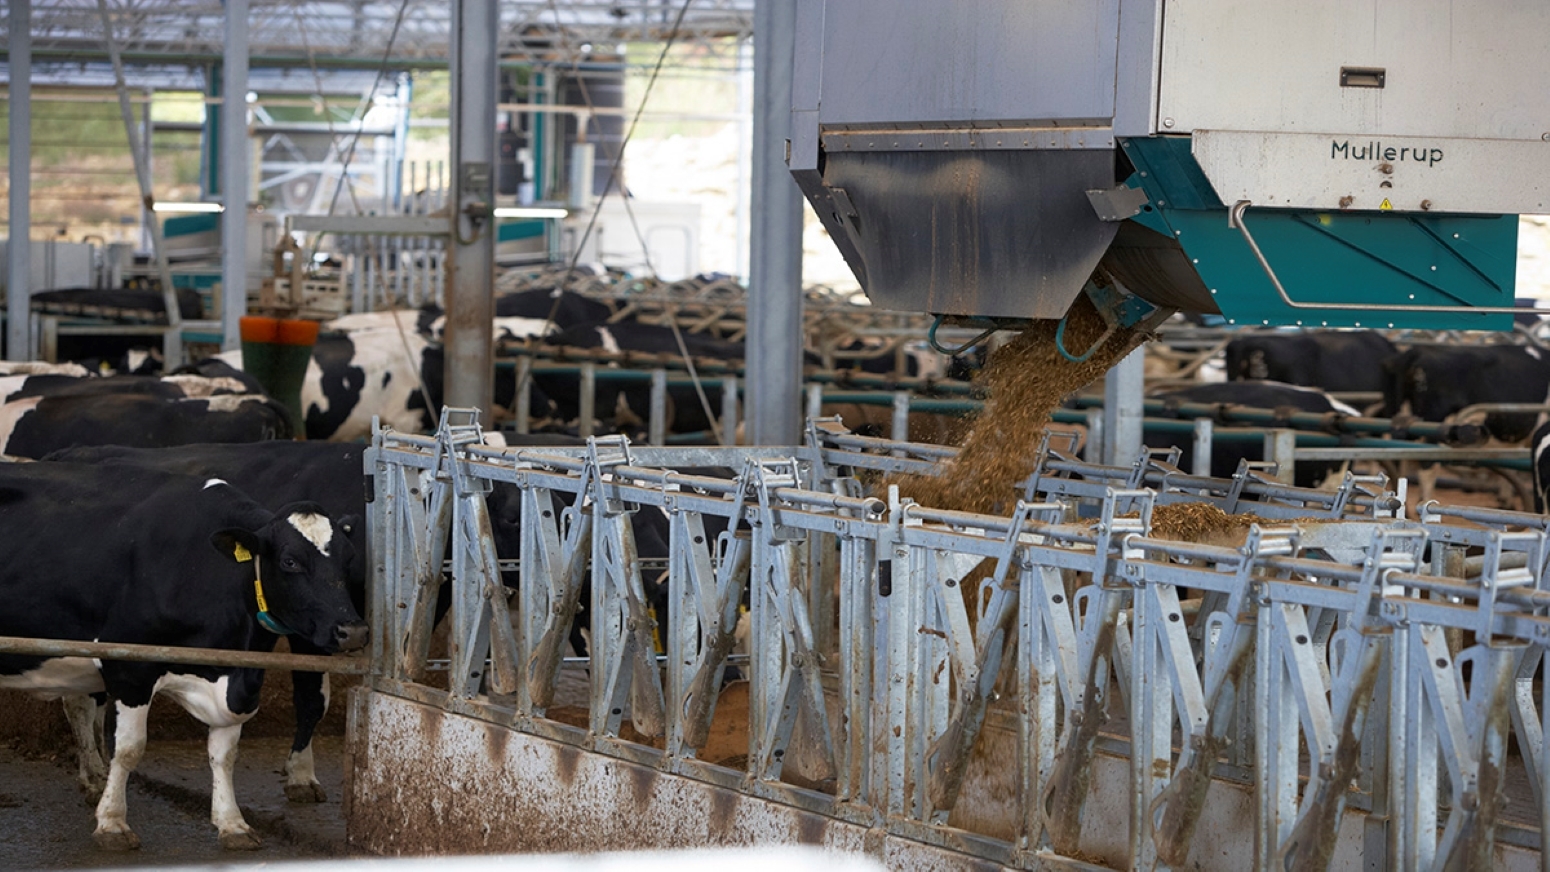 All kinds of automated new technology, like this feeding system, plays a role in the new S-W Dairy Centre